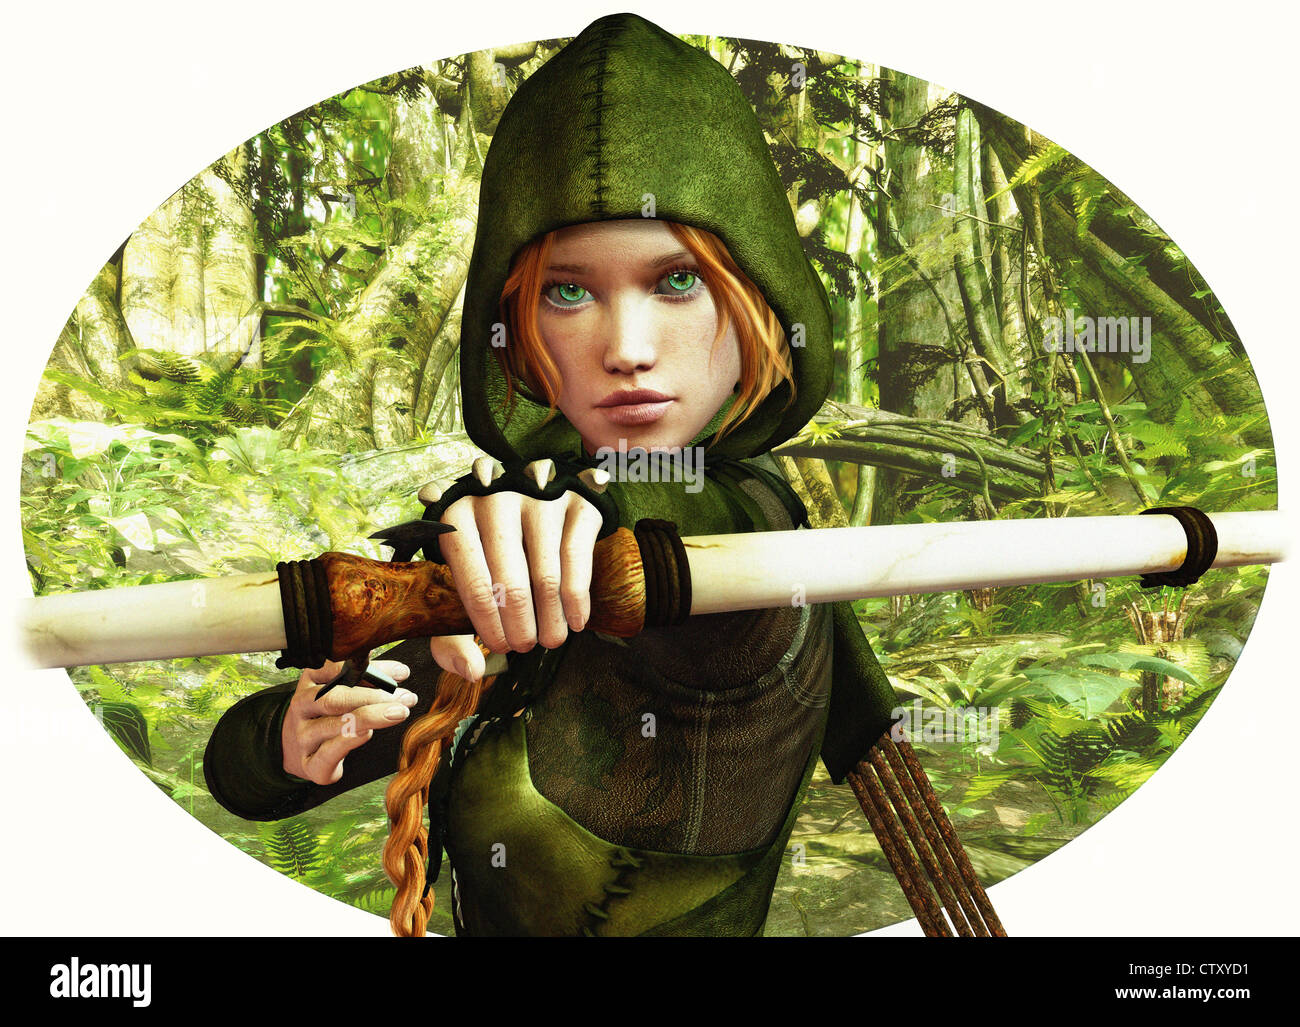 an archer girl in Robin Hood clothing Stock Photo